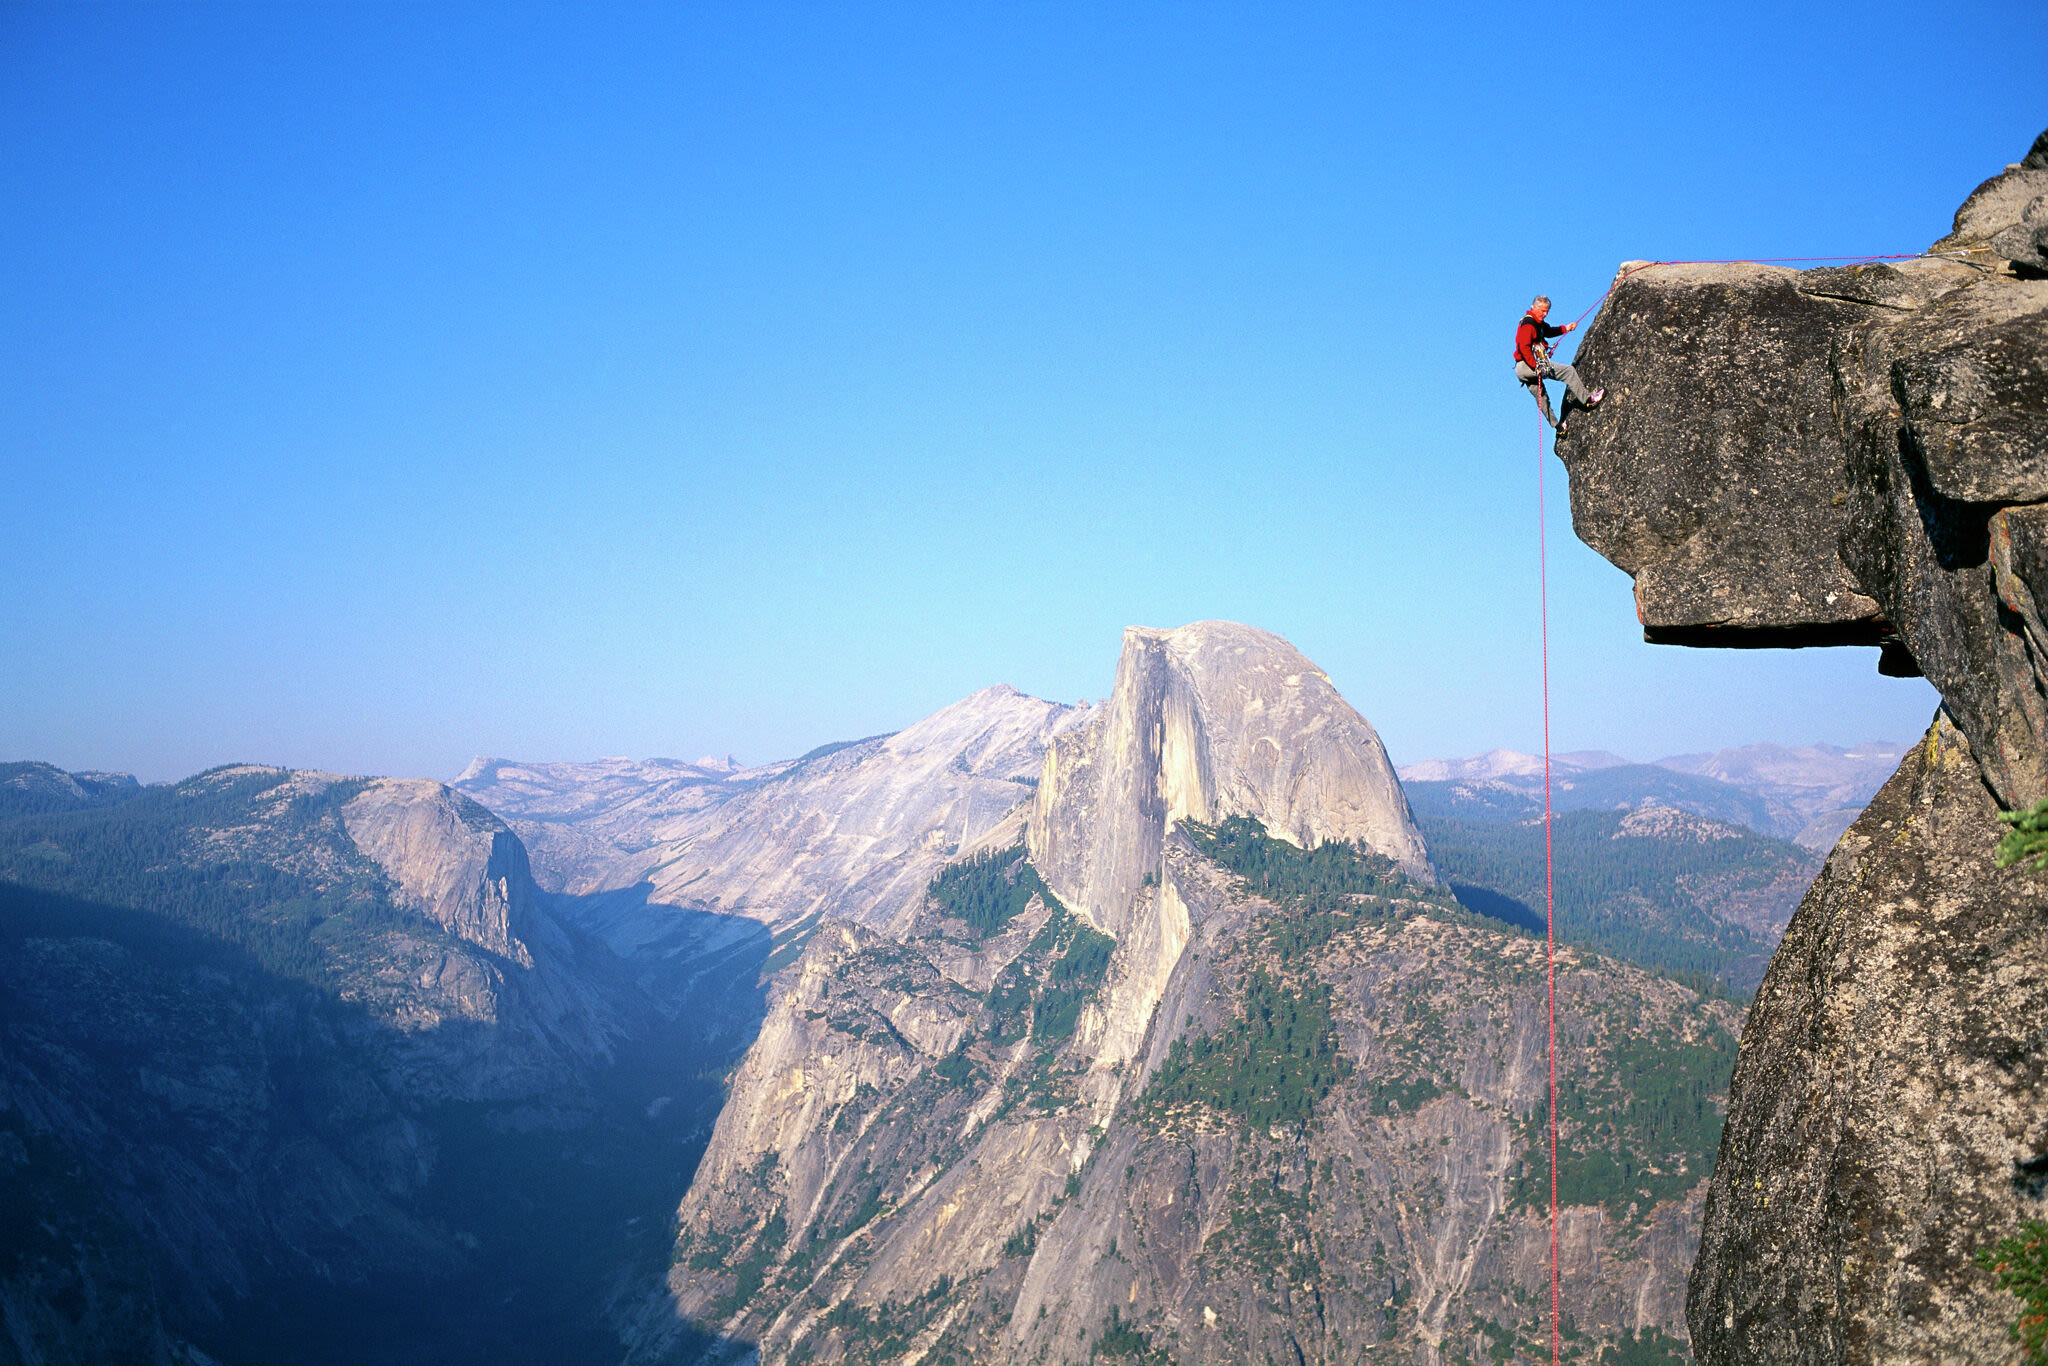 You can now track how many climbers are on Yosemite's walls